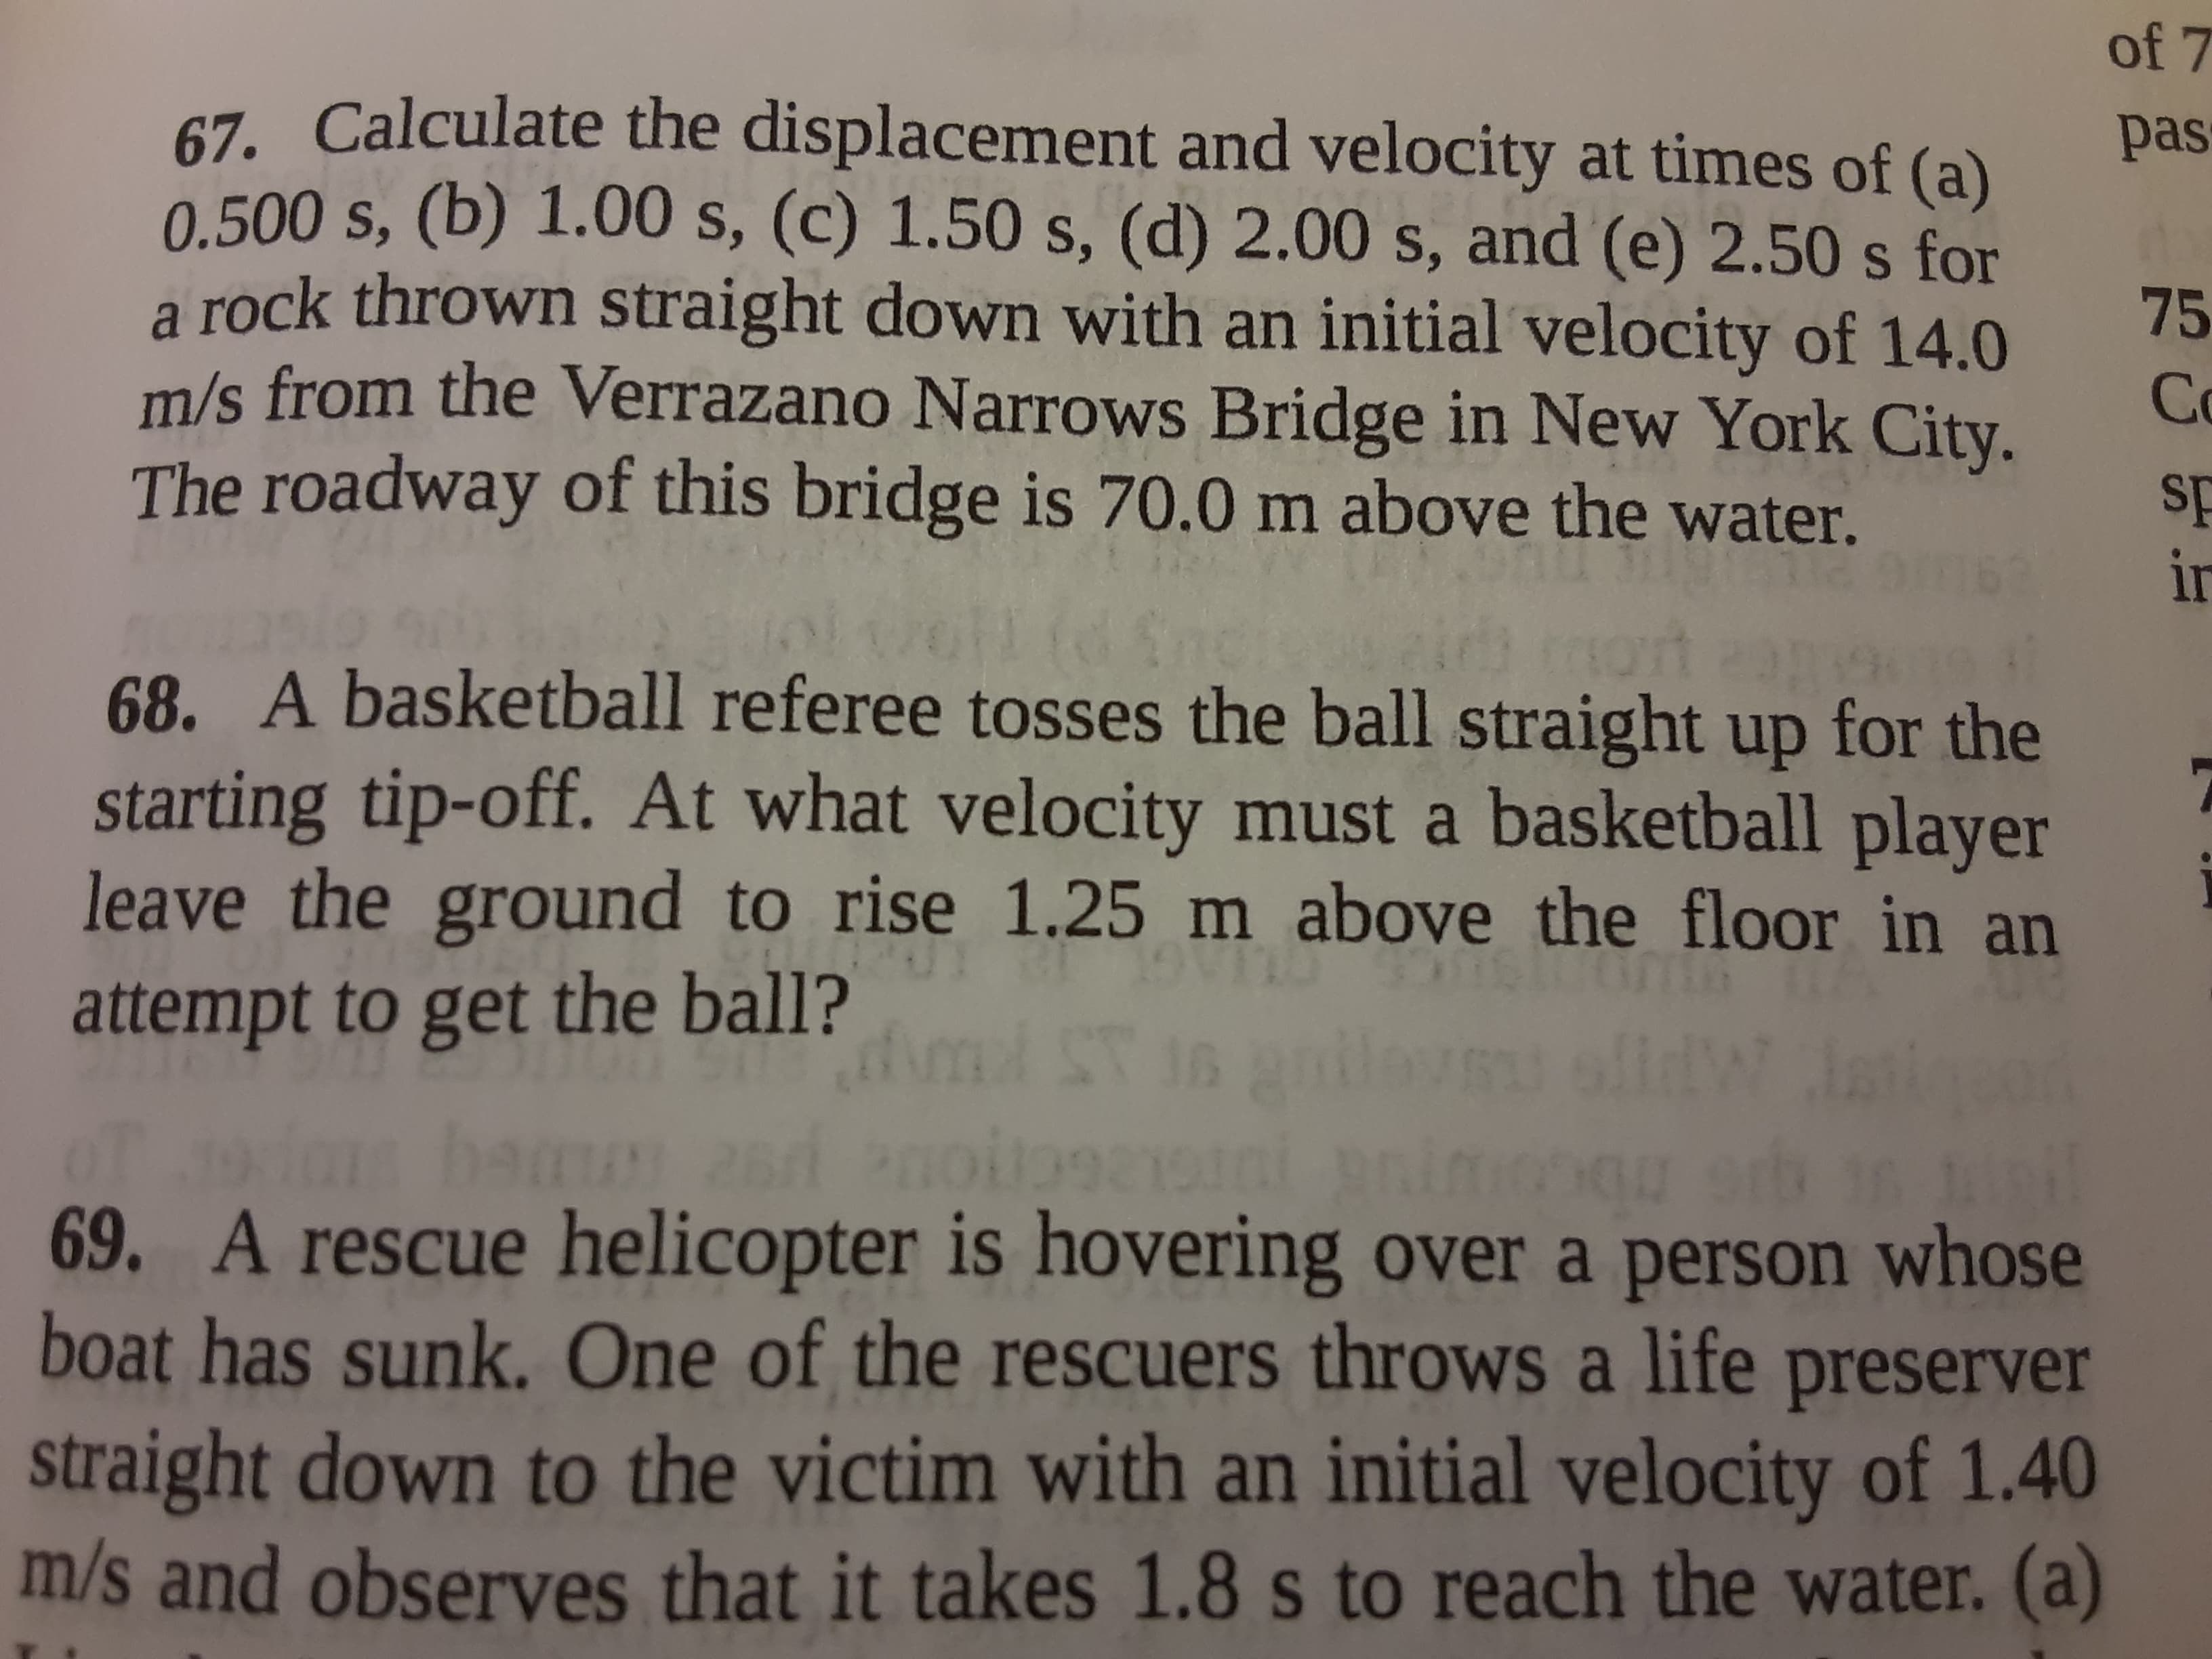 68. A basketball referee tosses the ball straight up for the
starting tip-off. At what velocity must a basketball player
leave the ground to rise 1.25 m above the floor in an
attempt to get the ball?
